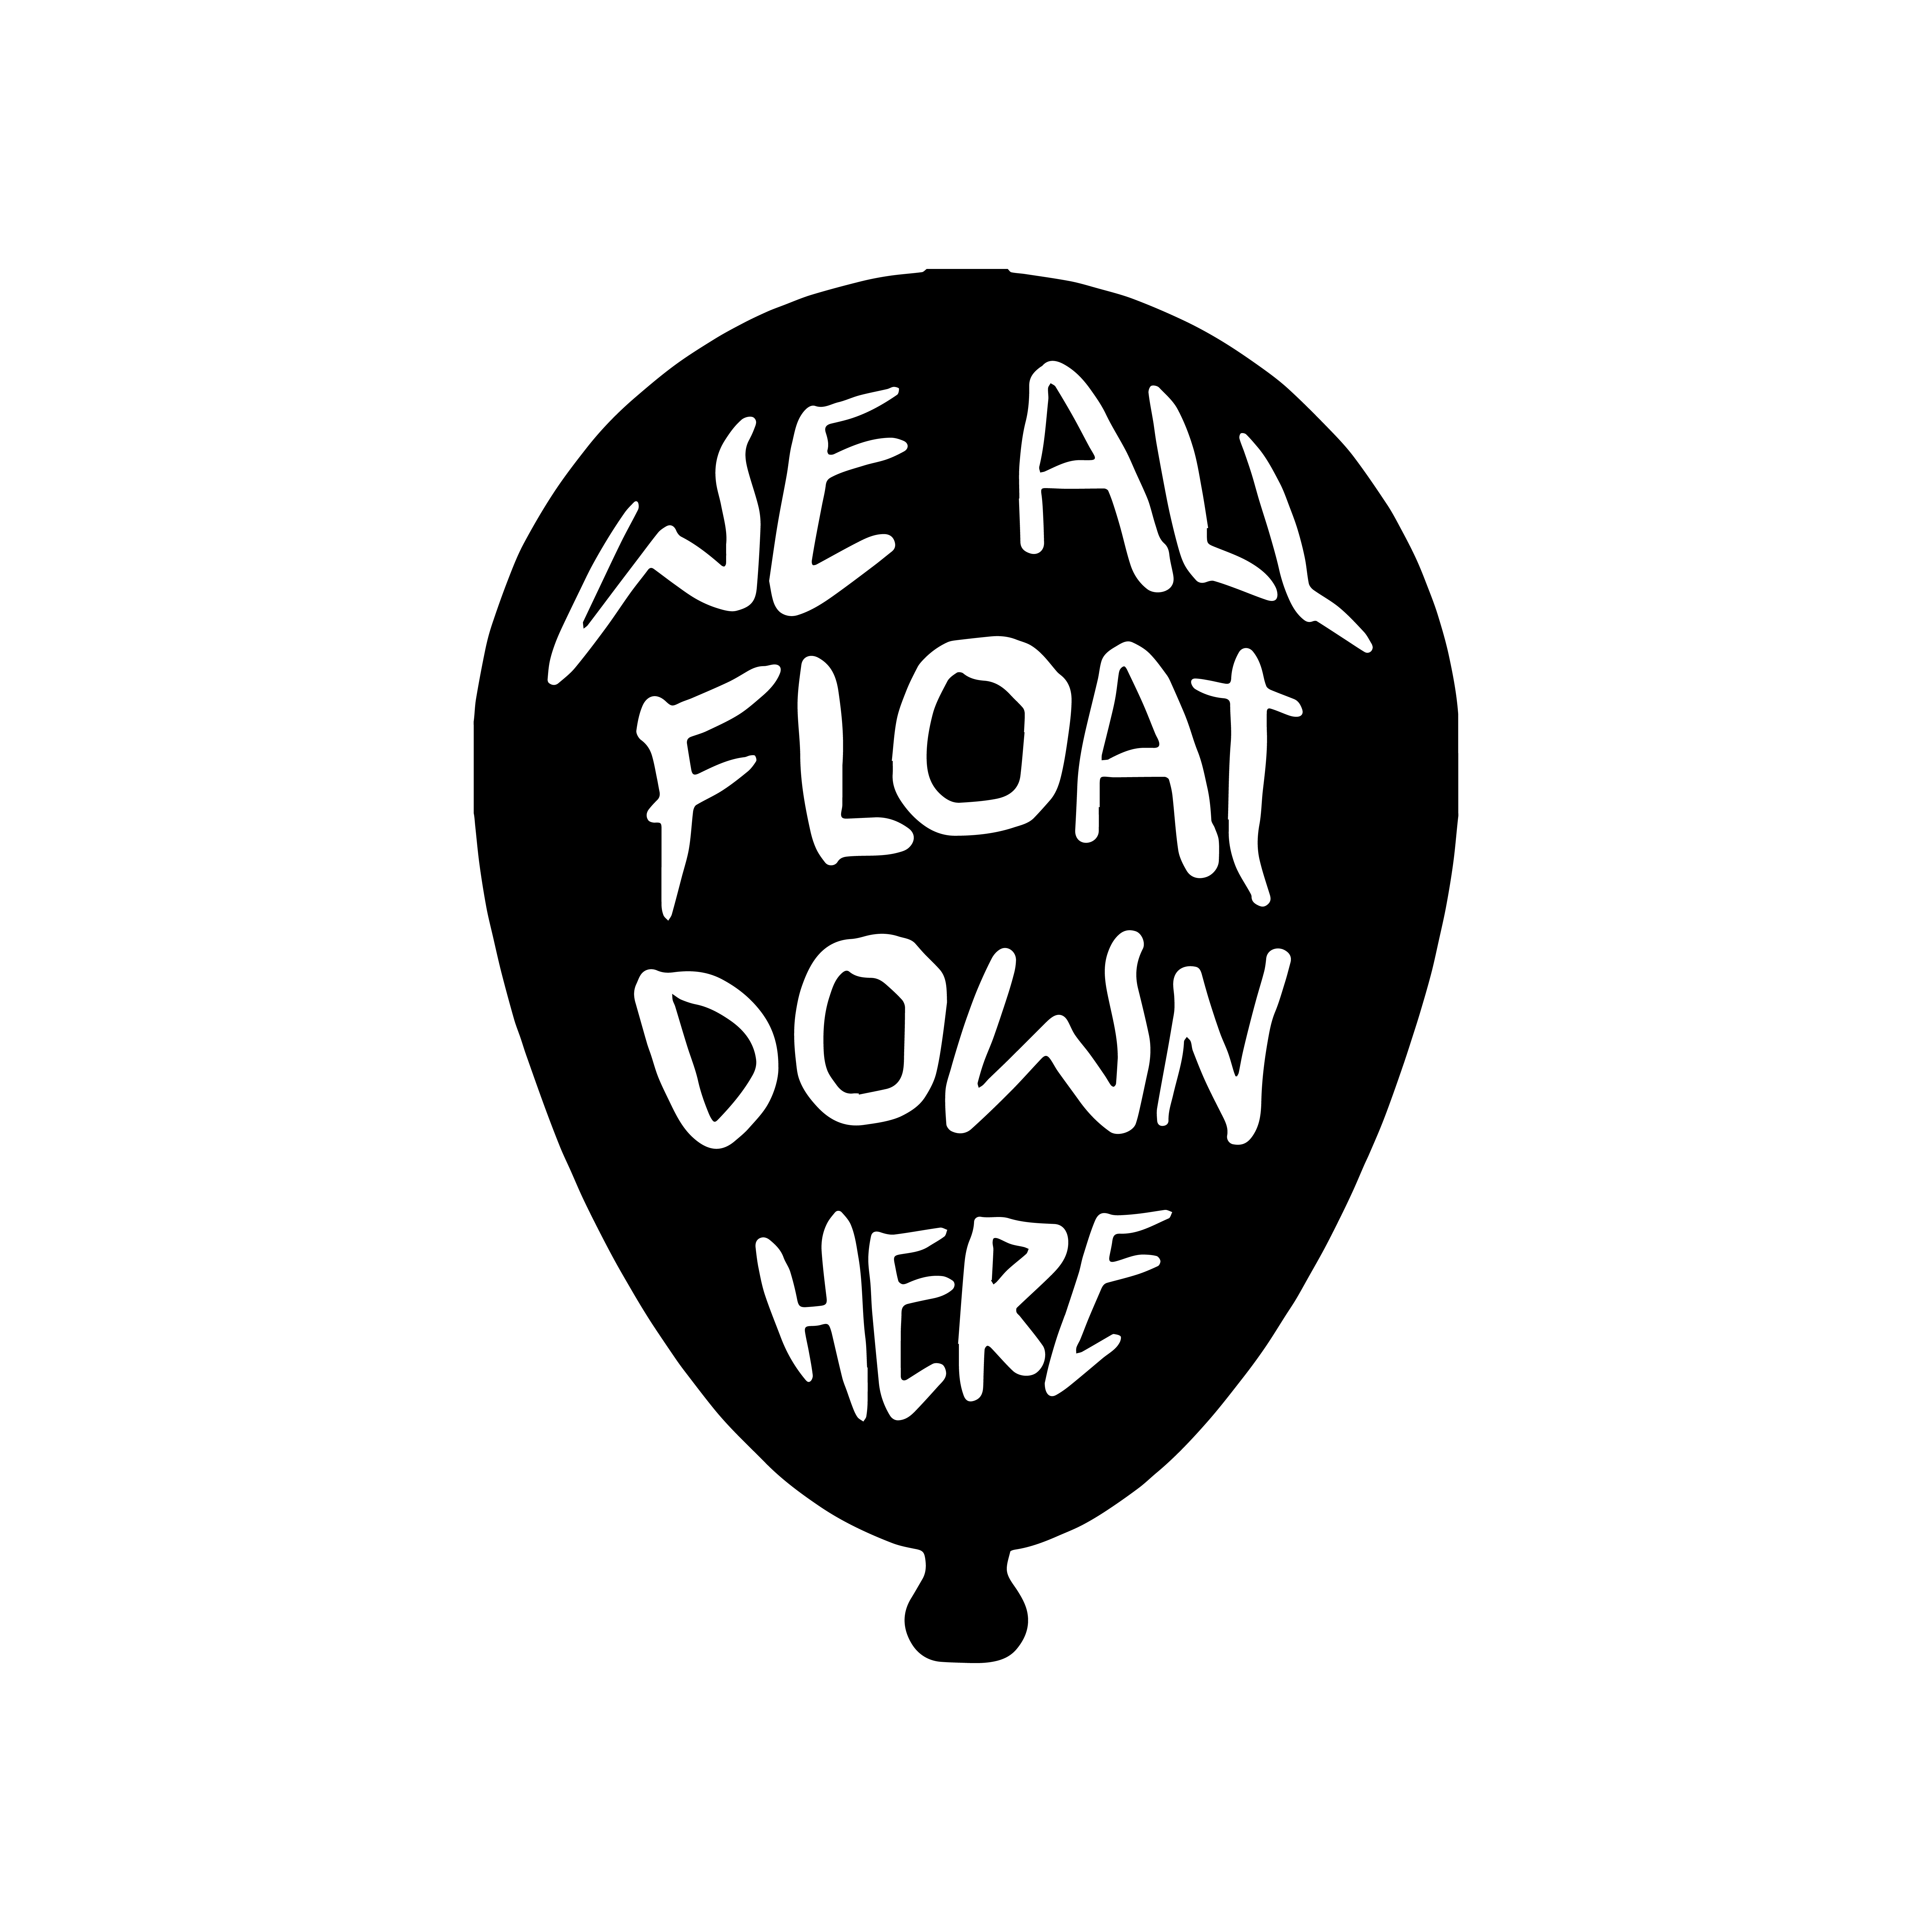 we all float down here